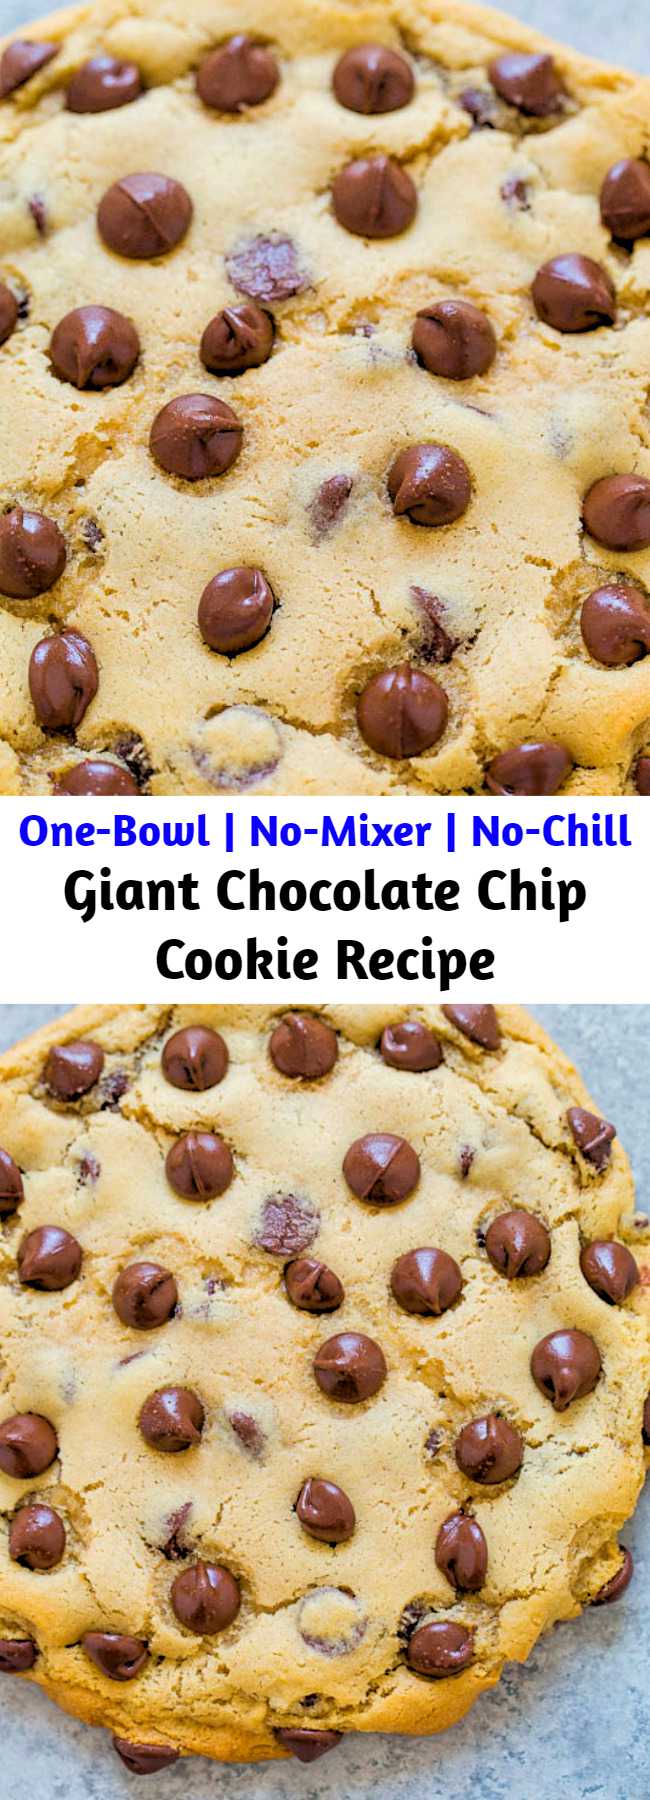 An incredibly FAST and EASY recipe that produces one GIANT soft and chewy cookie that’s loaded with chocolate!! One bowl to wash, no mixer, and no waiting!!